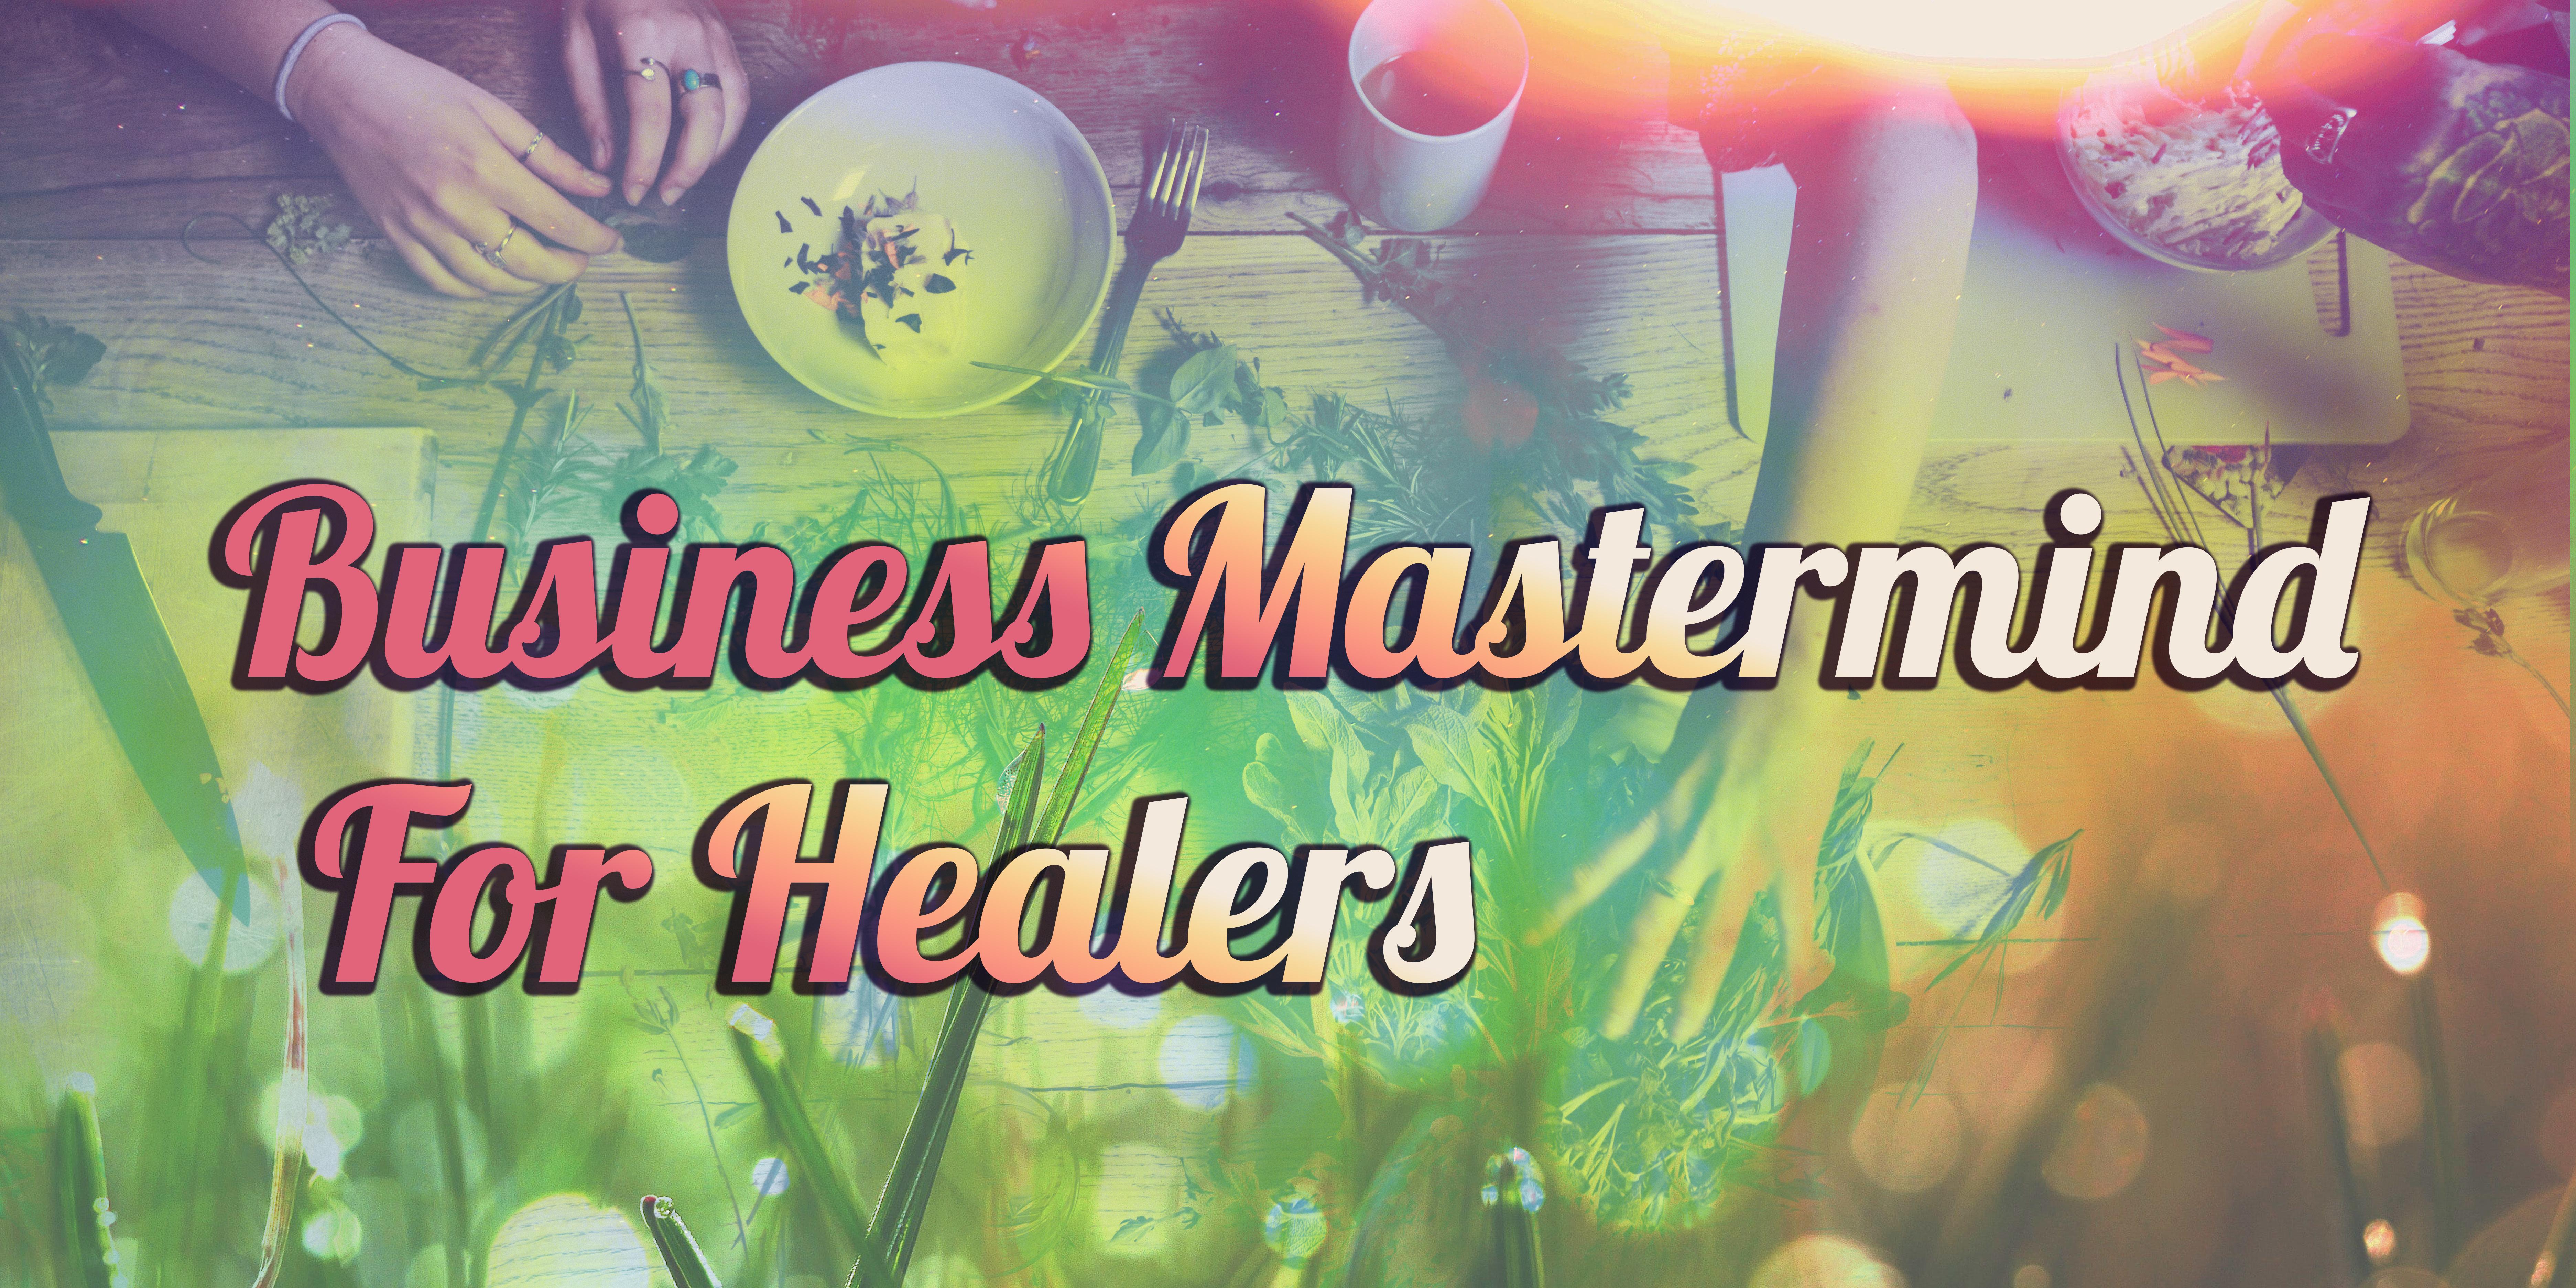 Business Mastermind for Healers